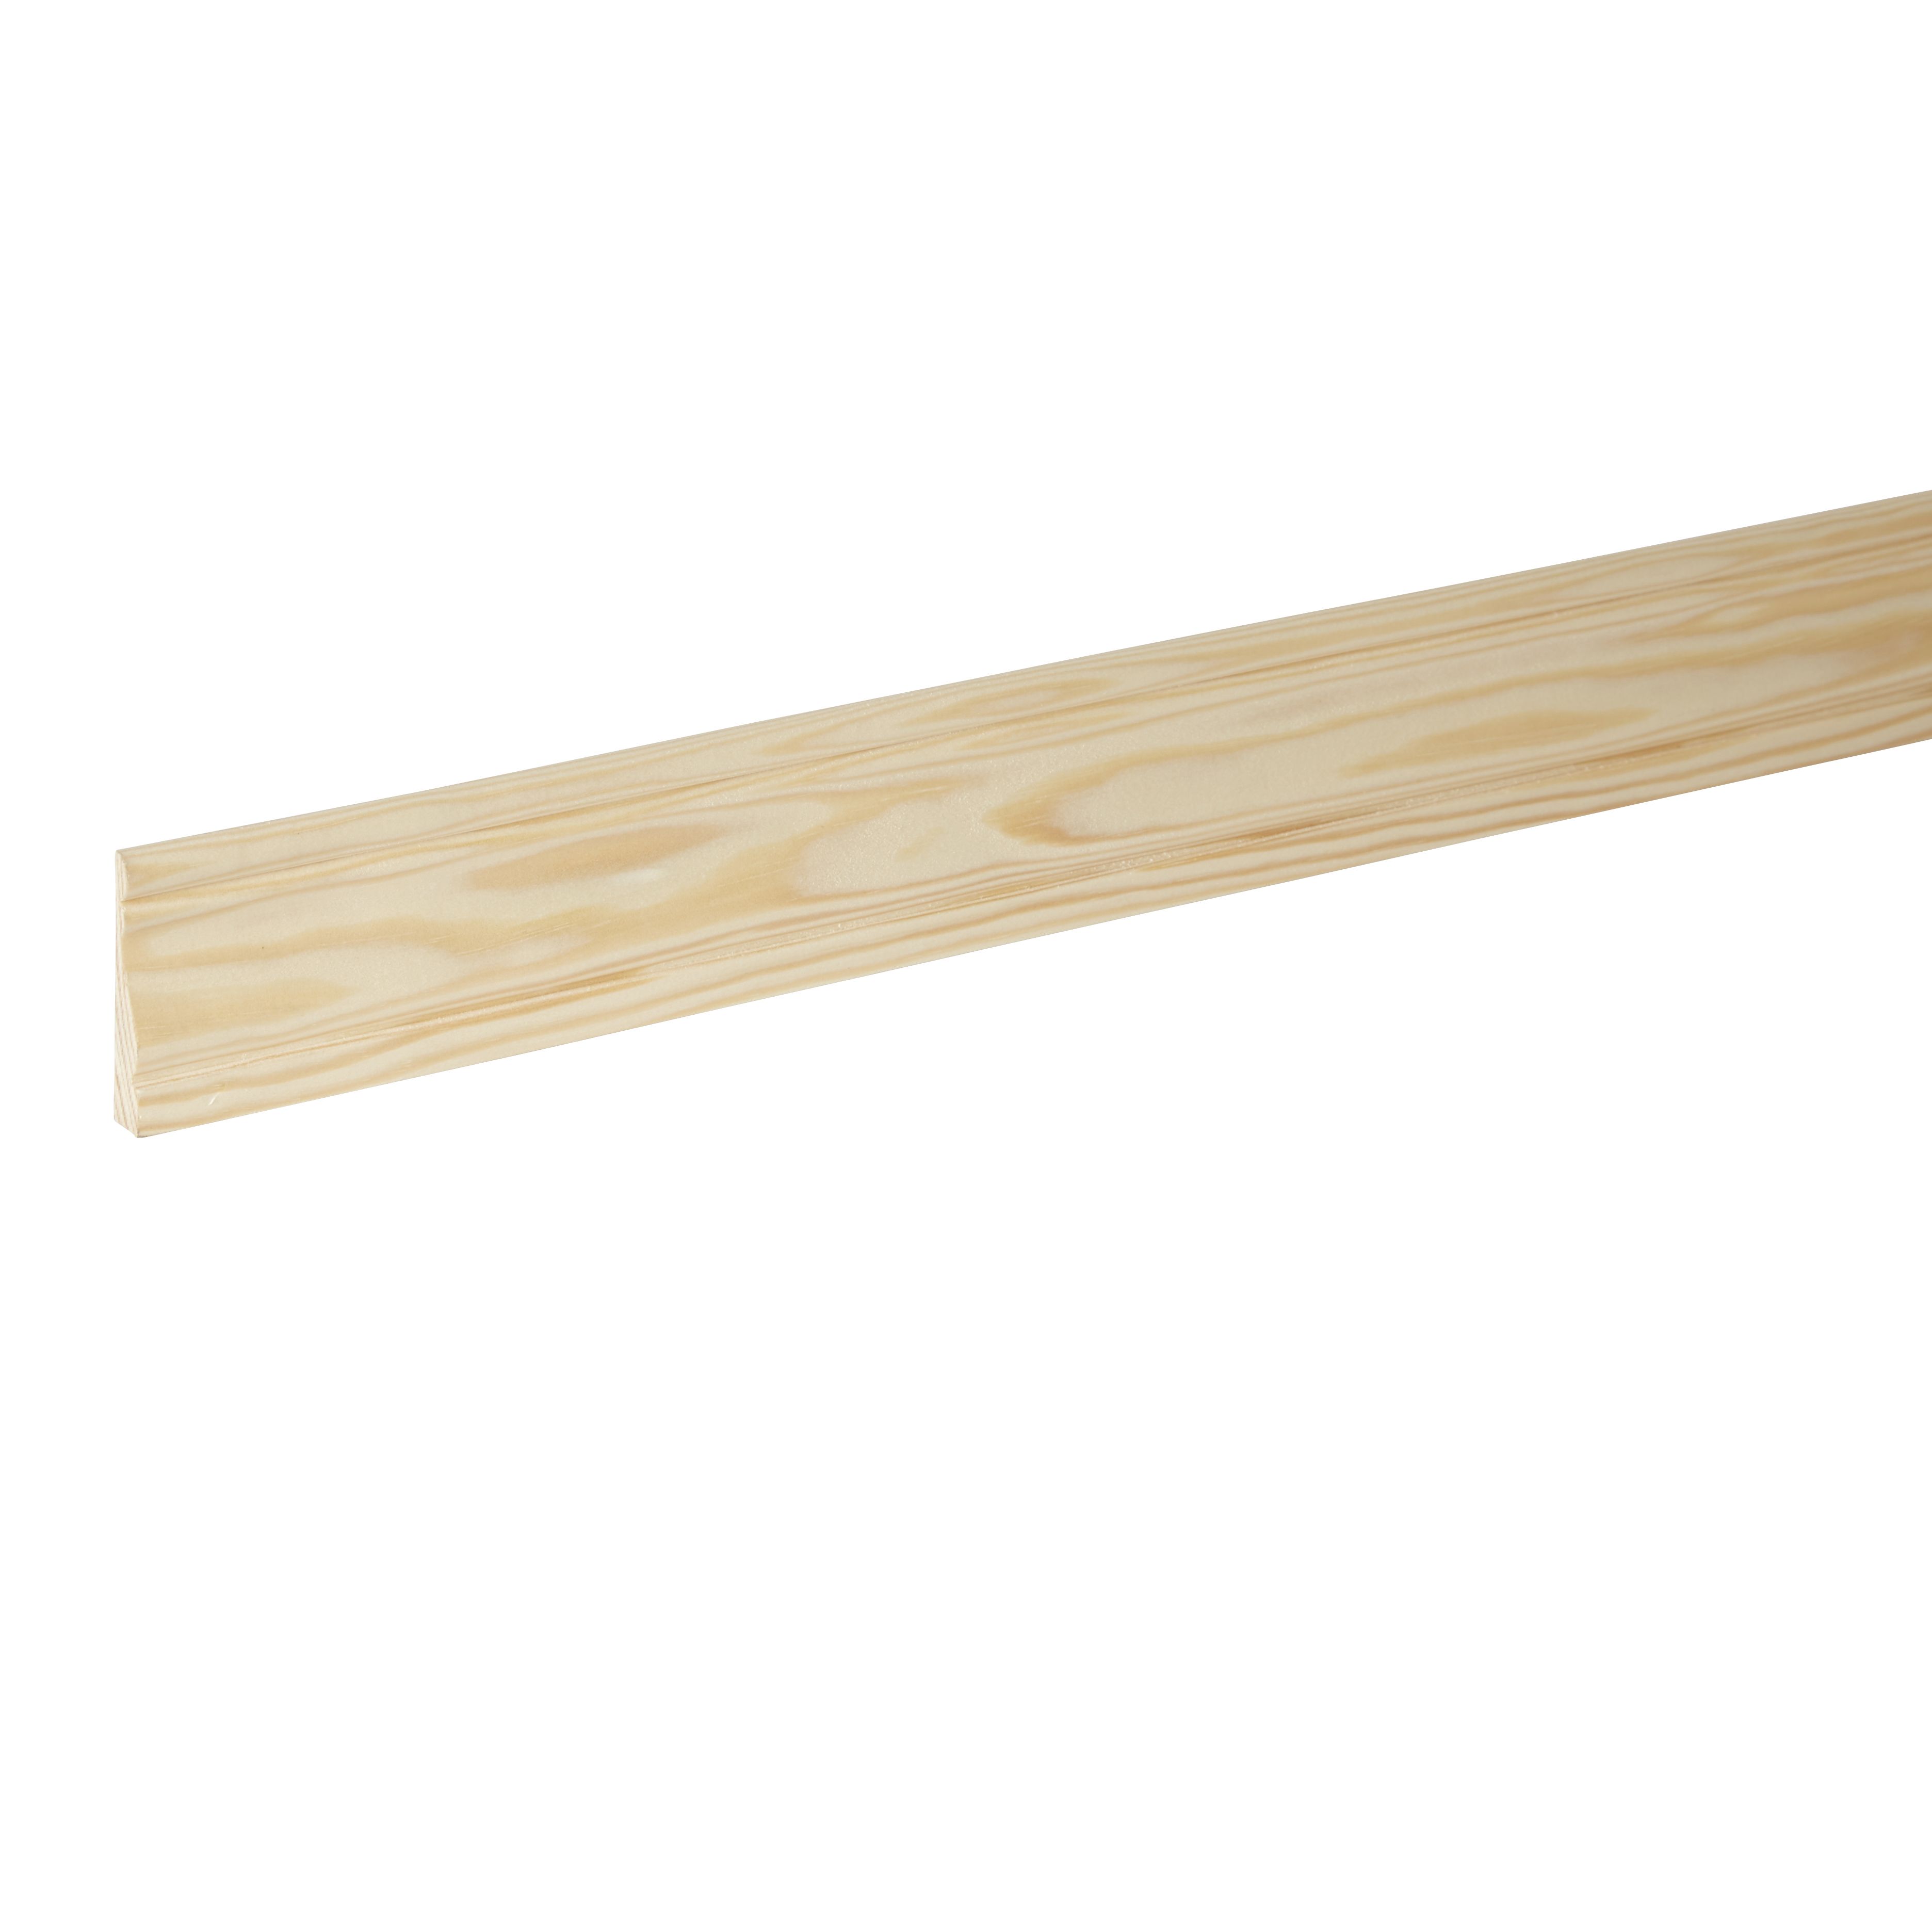 Smooth Ogee Pine Moulding